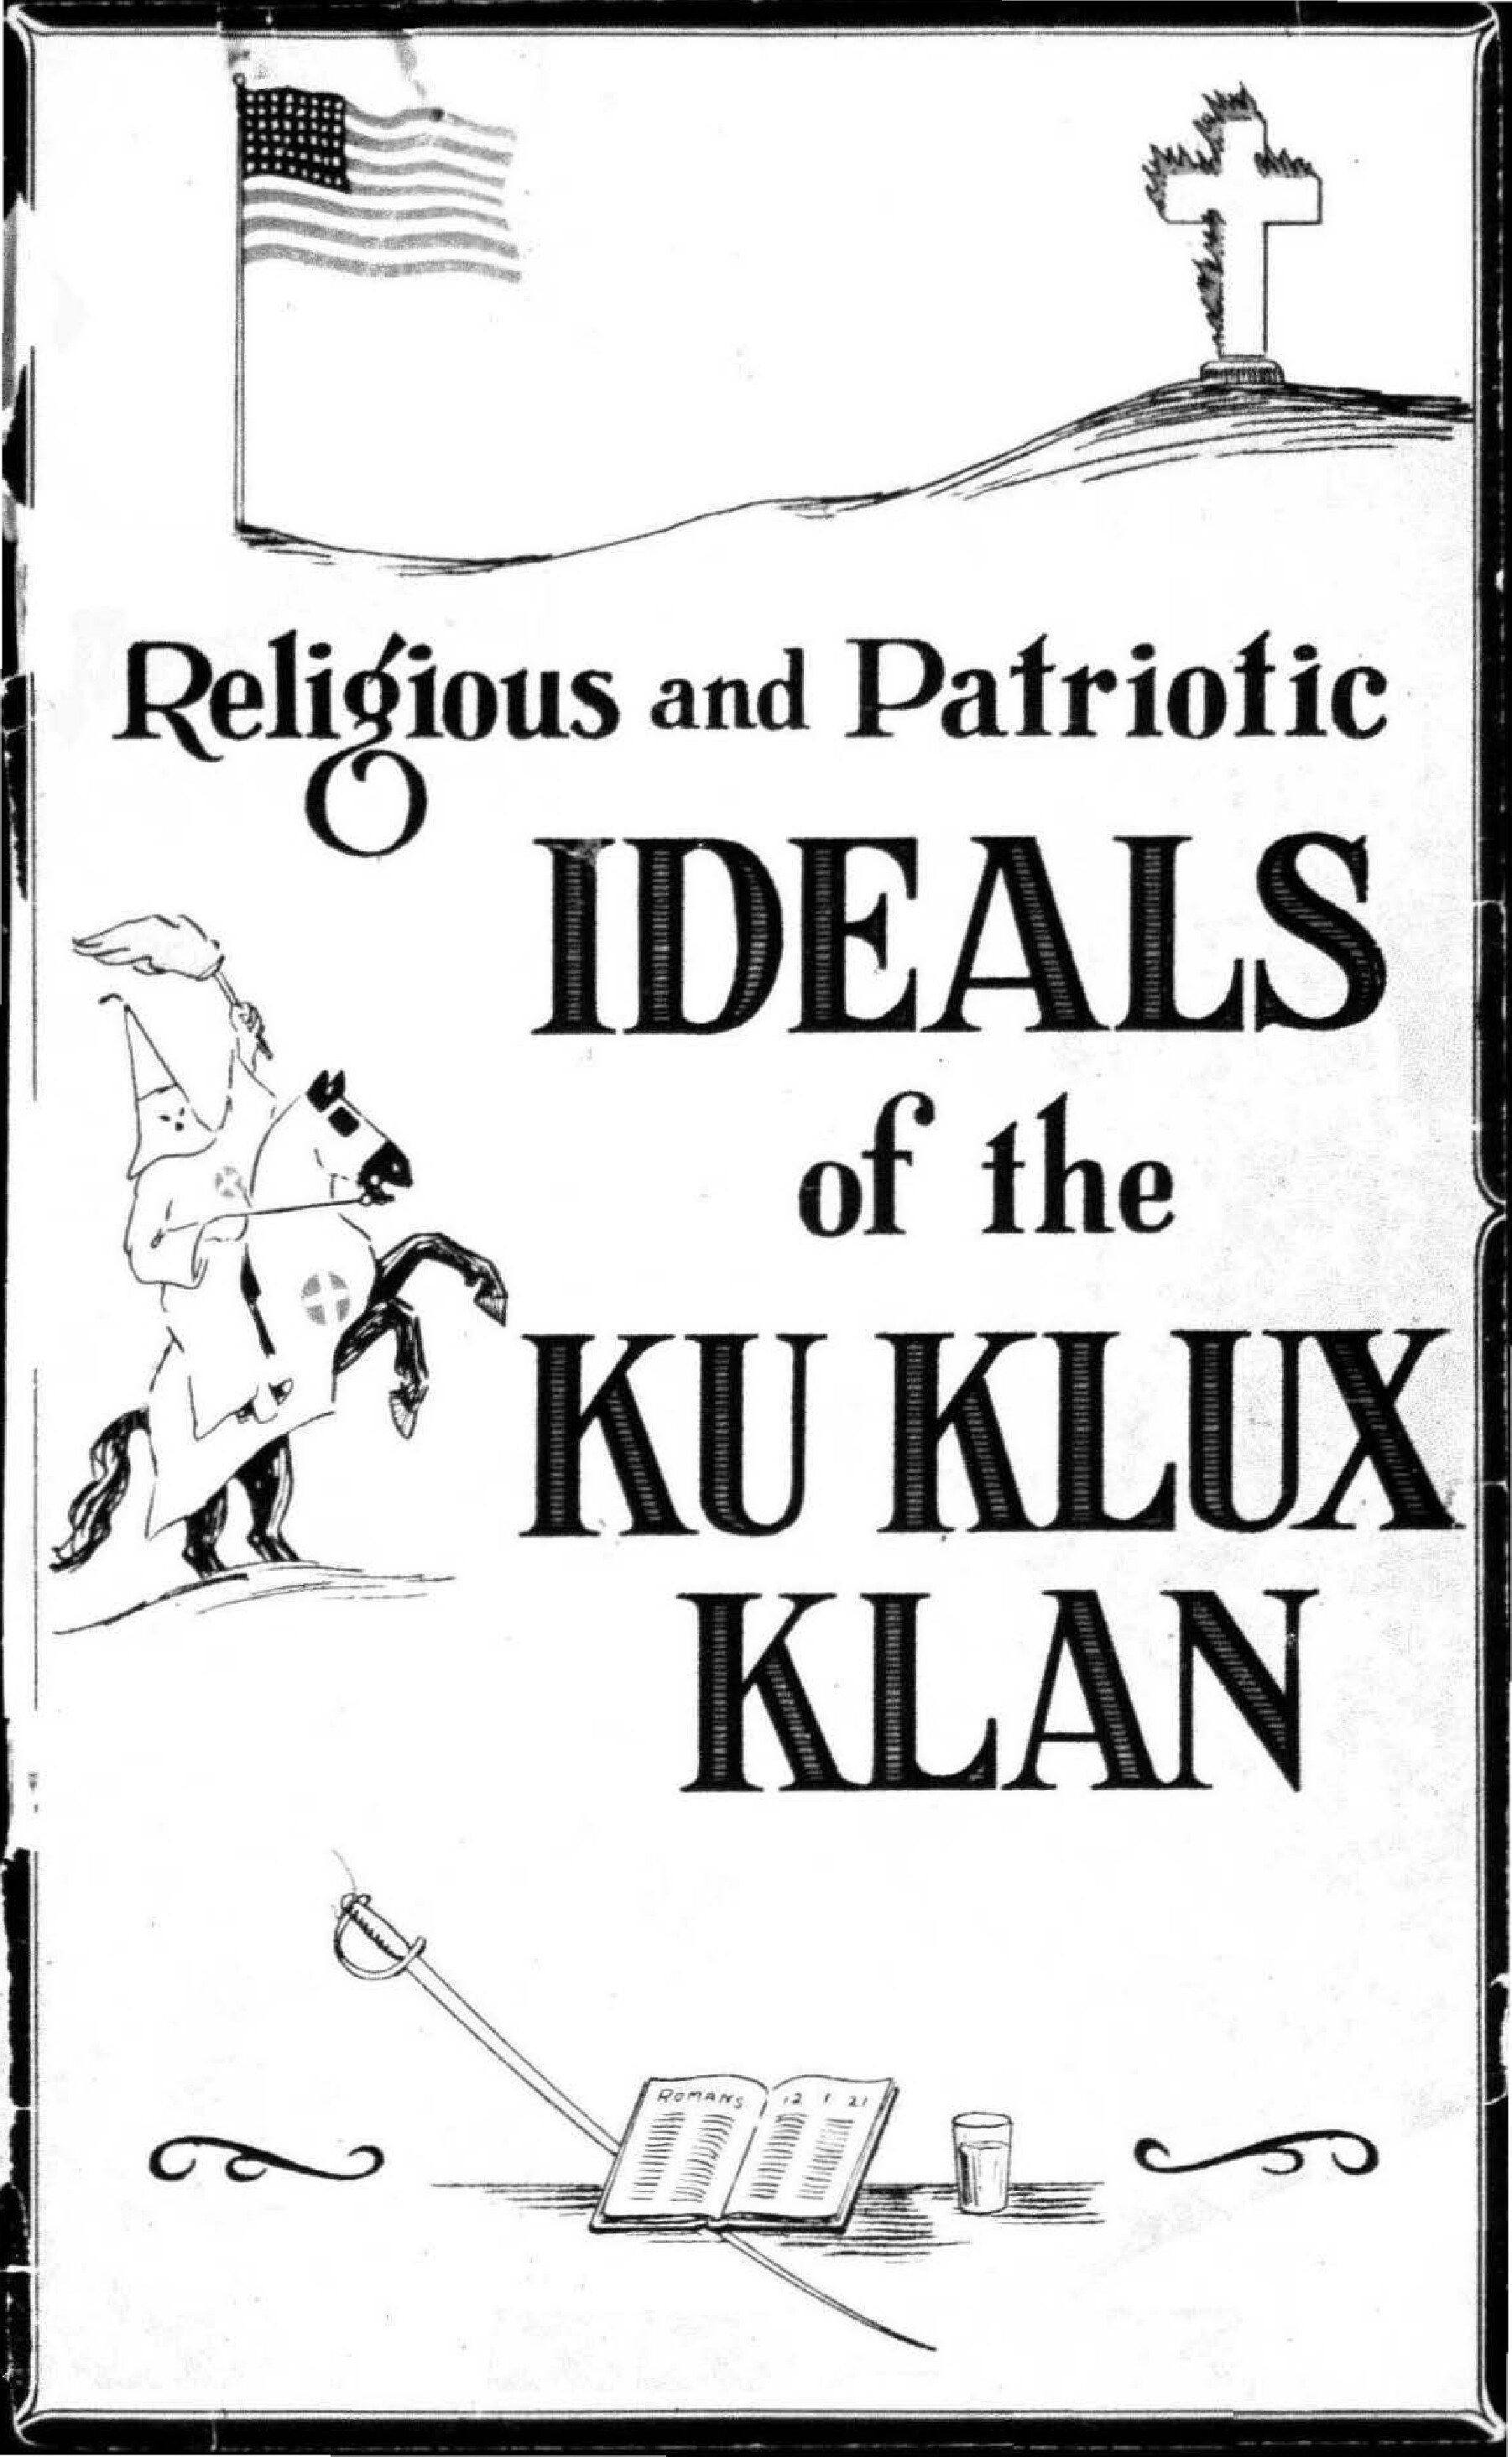 Religious and Patriotic Ideals of the Ku Klux Klan